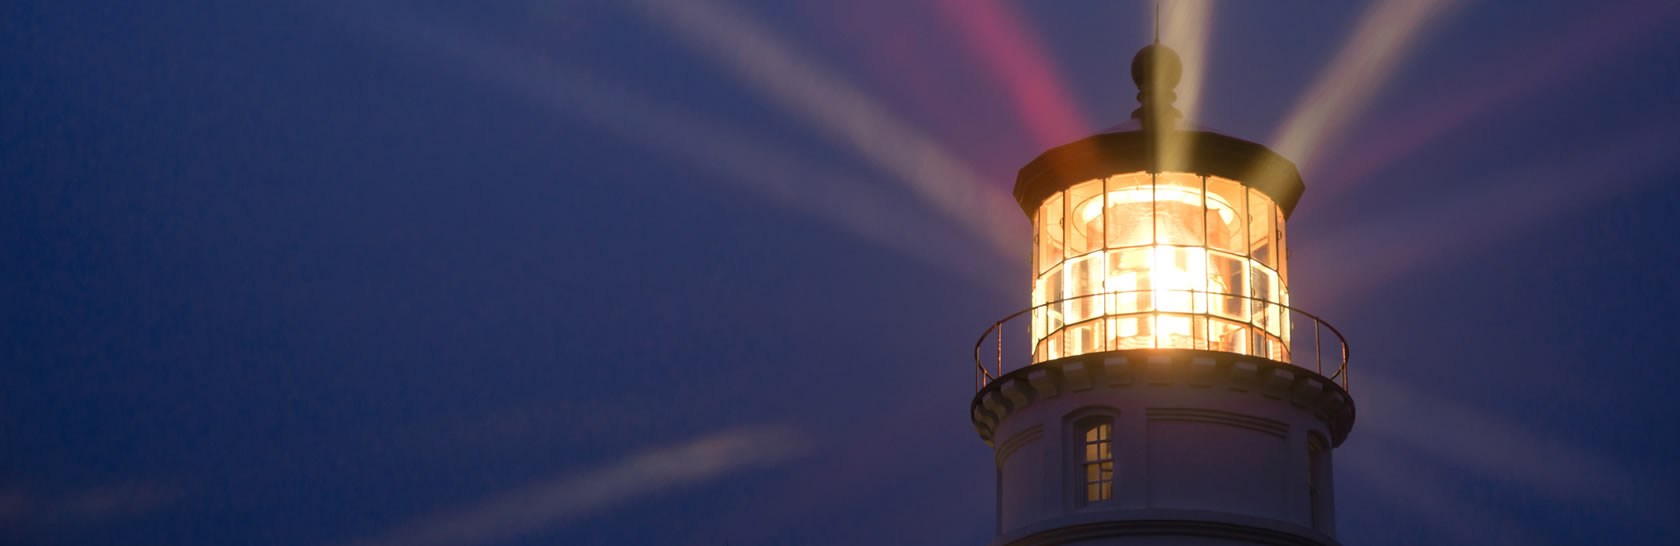 close-up view of a lighthouse shining brightly